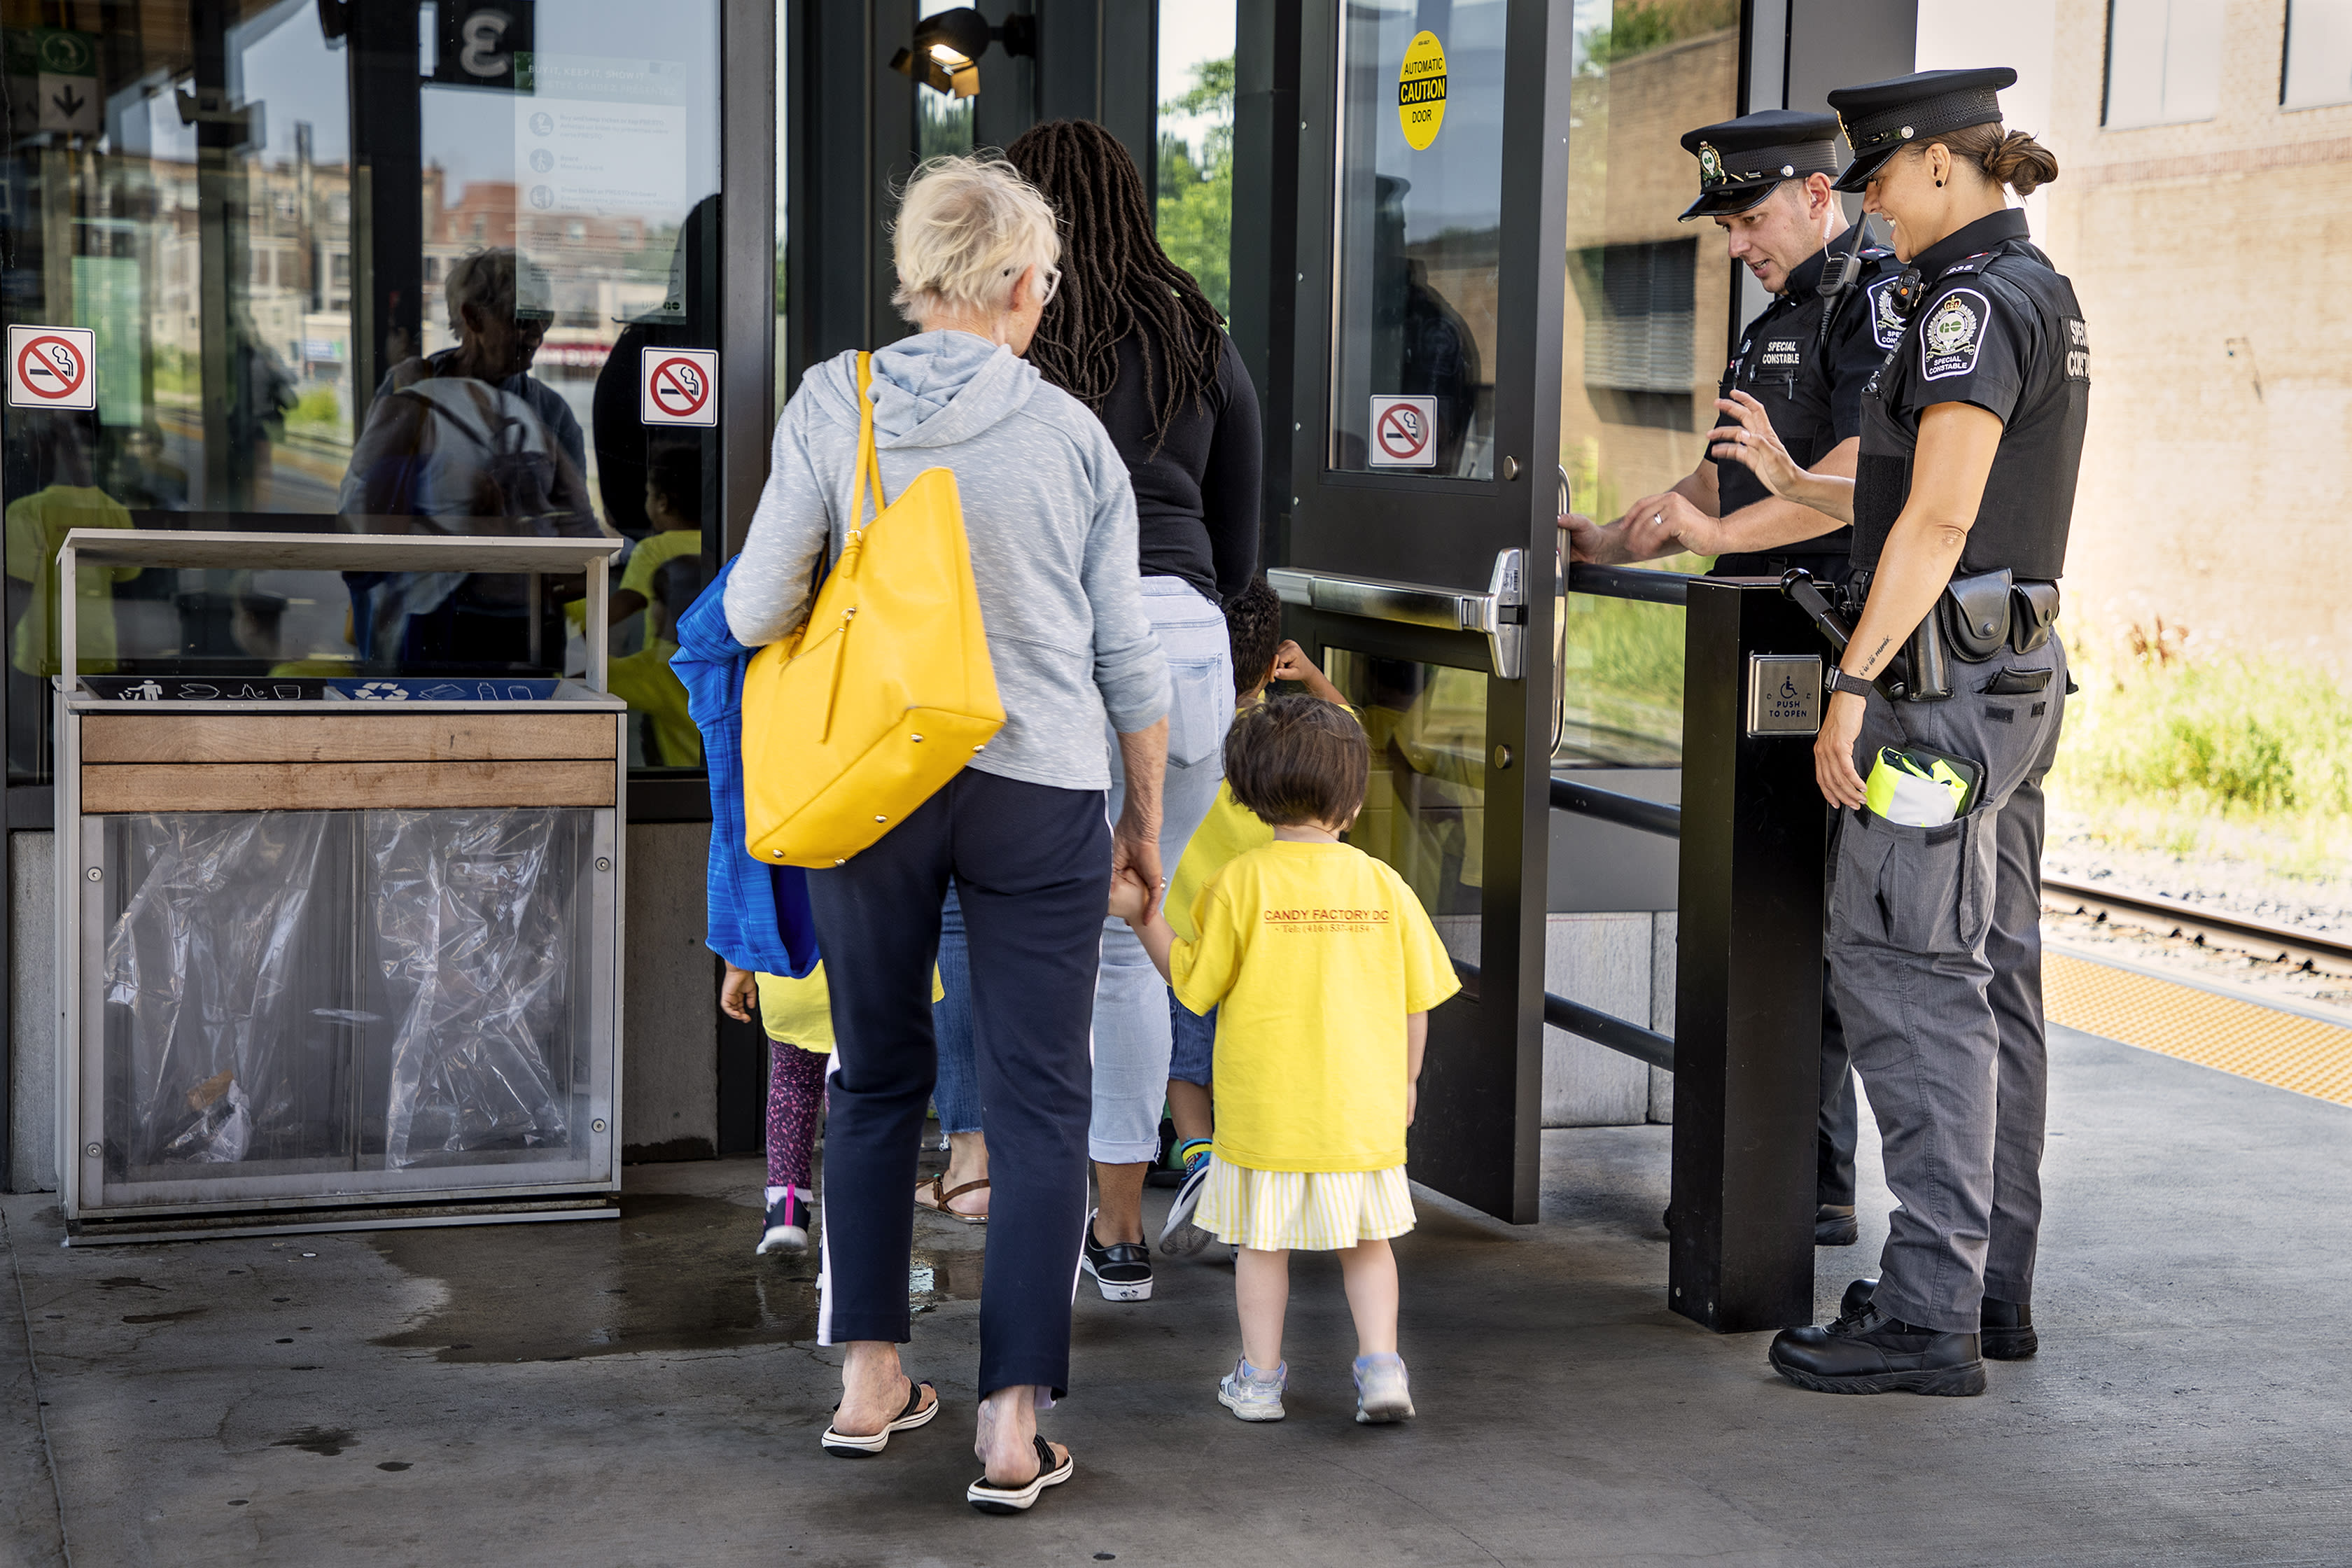 Children wave at transit safety officers as they leave the platform, on the way home.